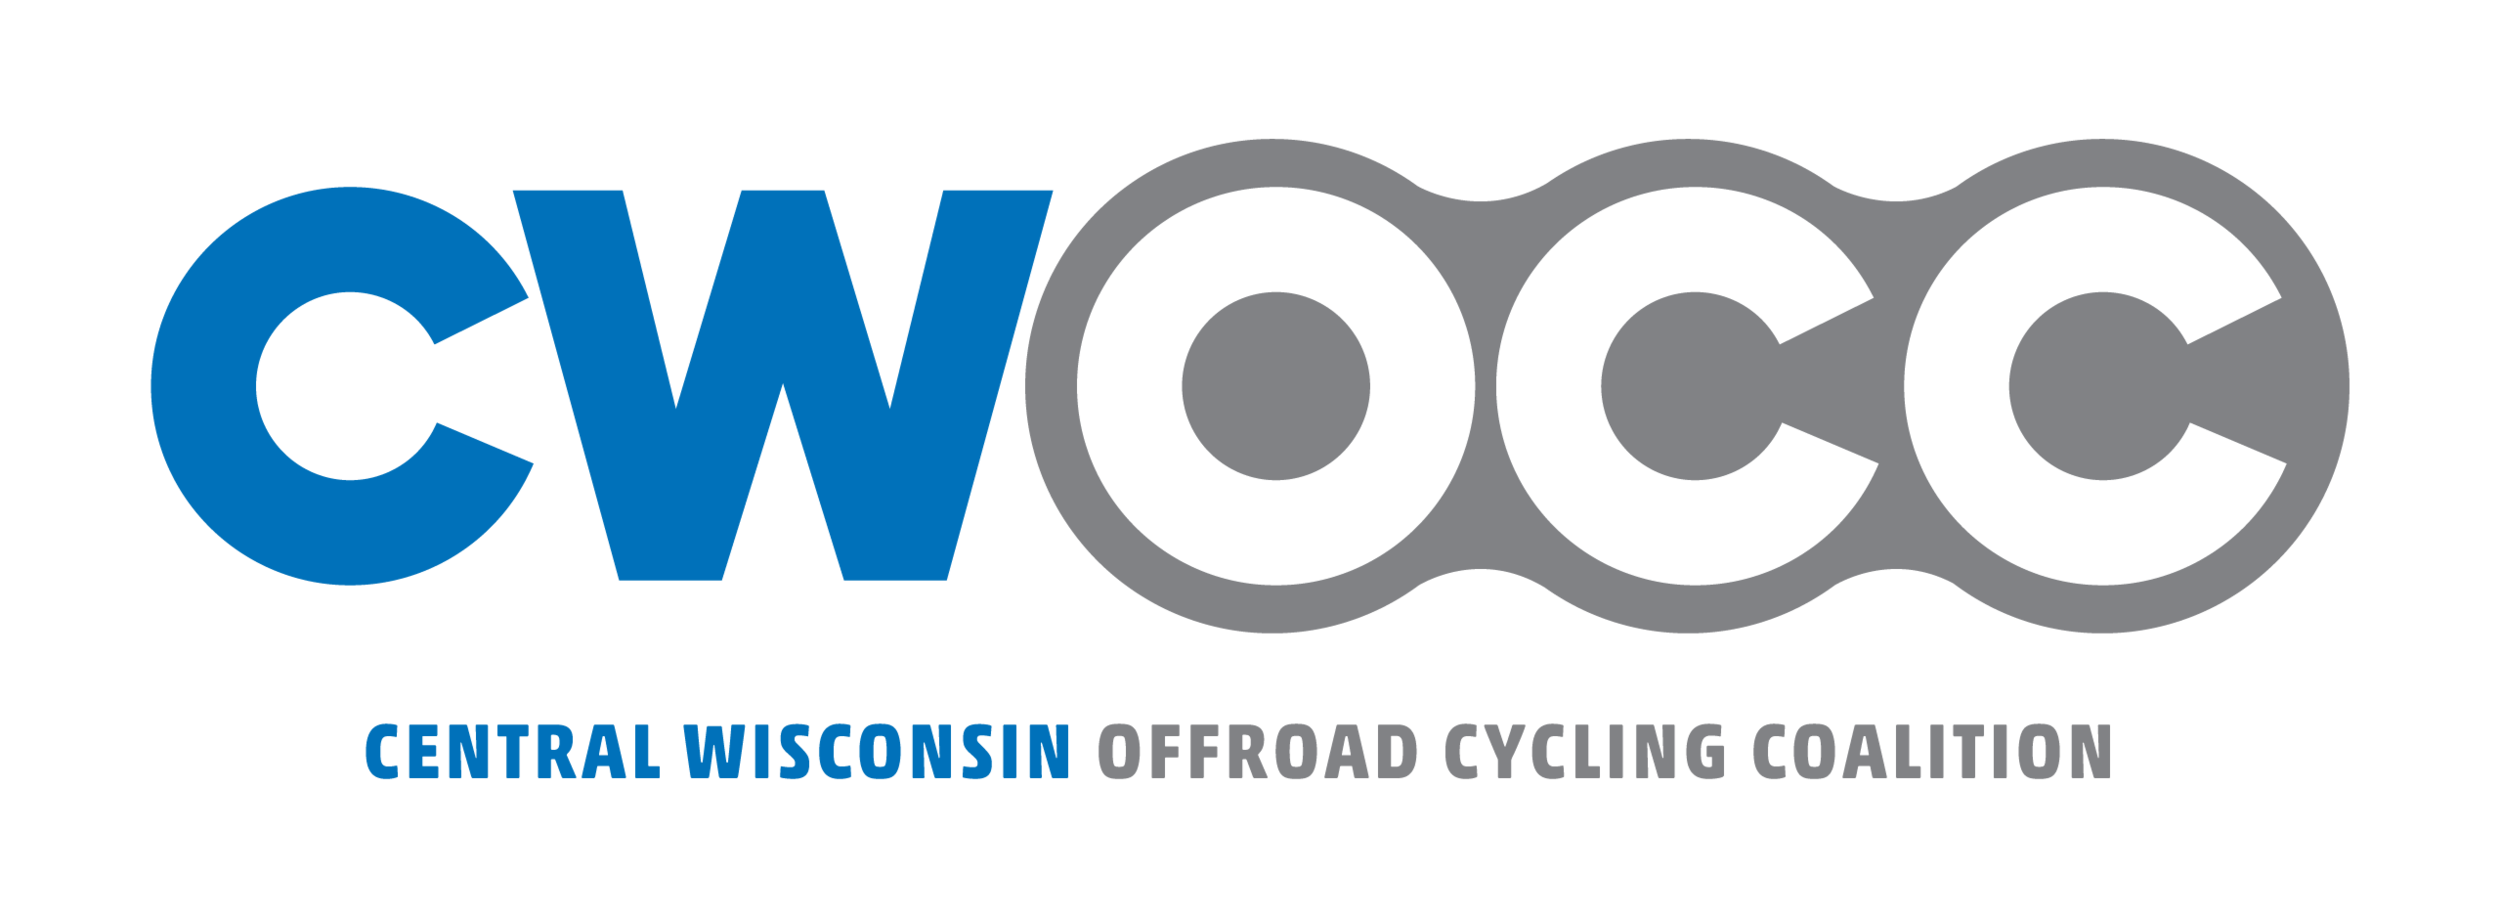  Central Wisconsin Offroad Cycling Coalition (CWOCC) Logo 